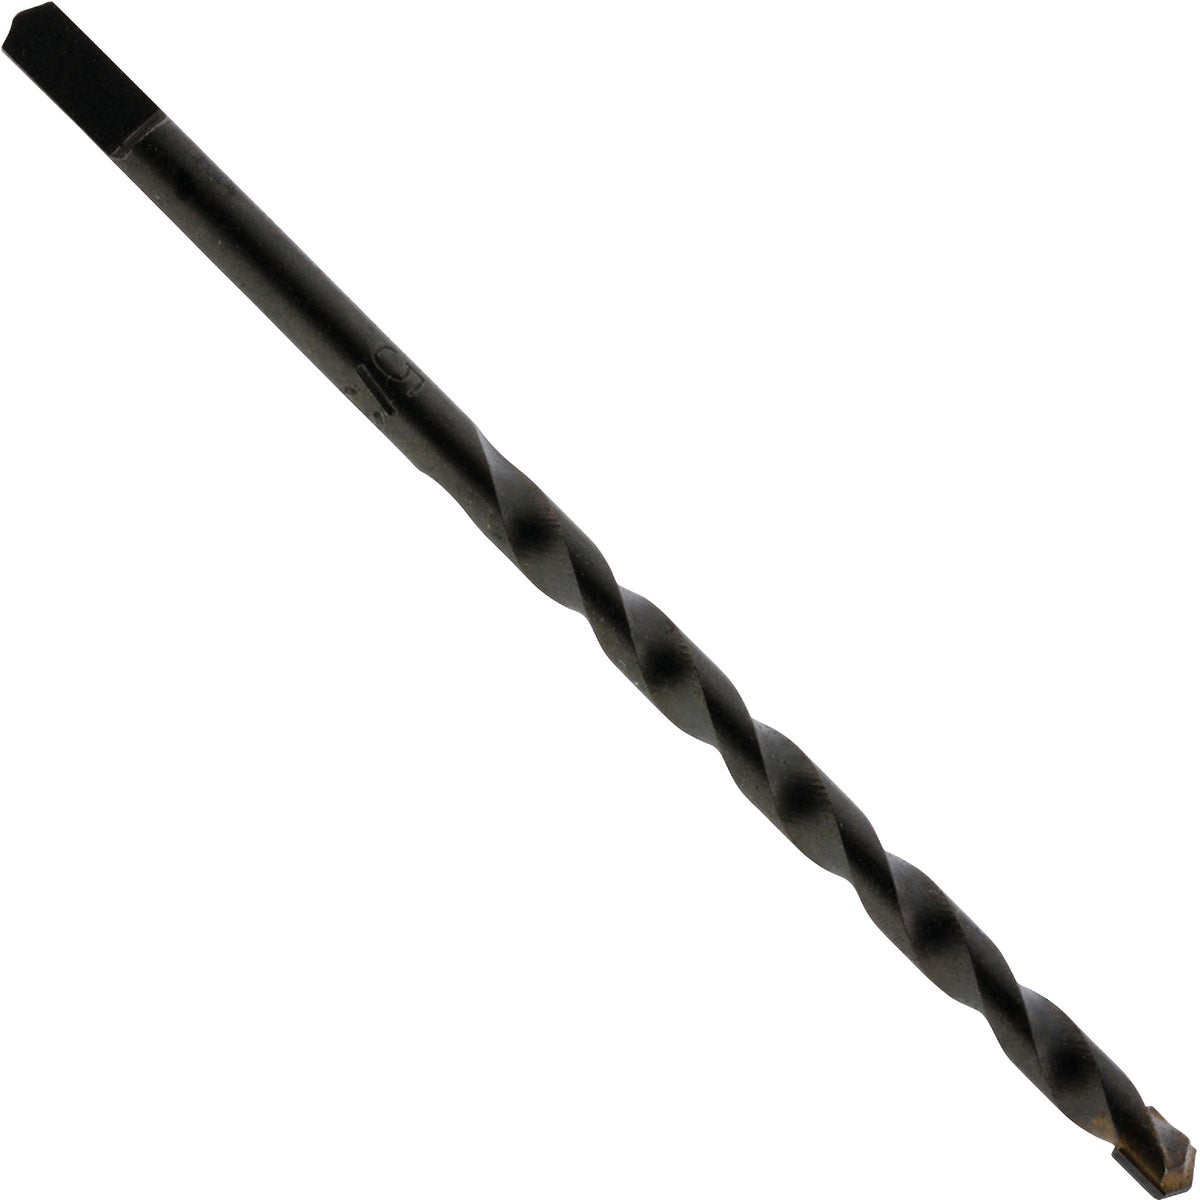 Hillman 3/8 In. x 6 In. Carbon Tipped Masonry Drill Bit